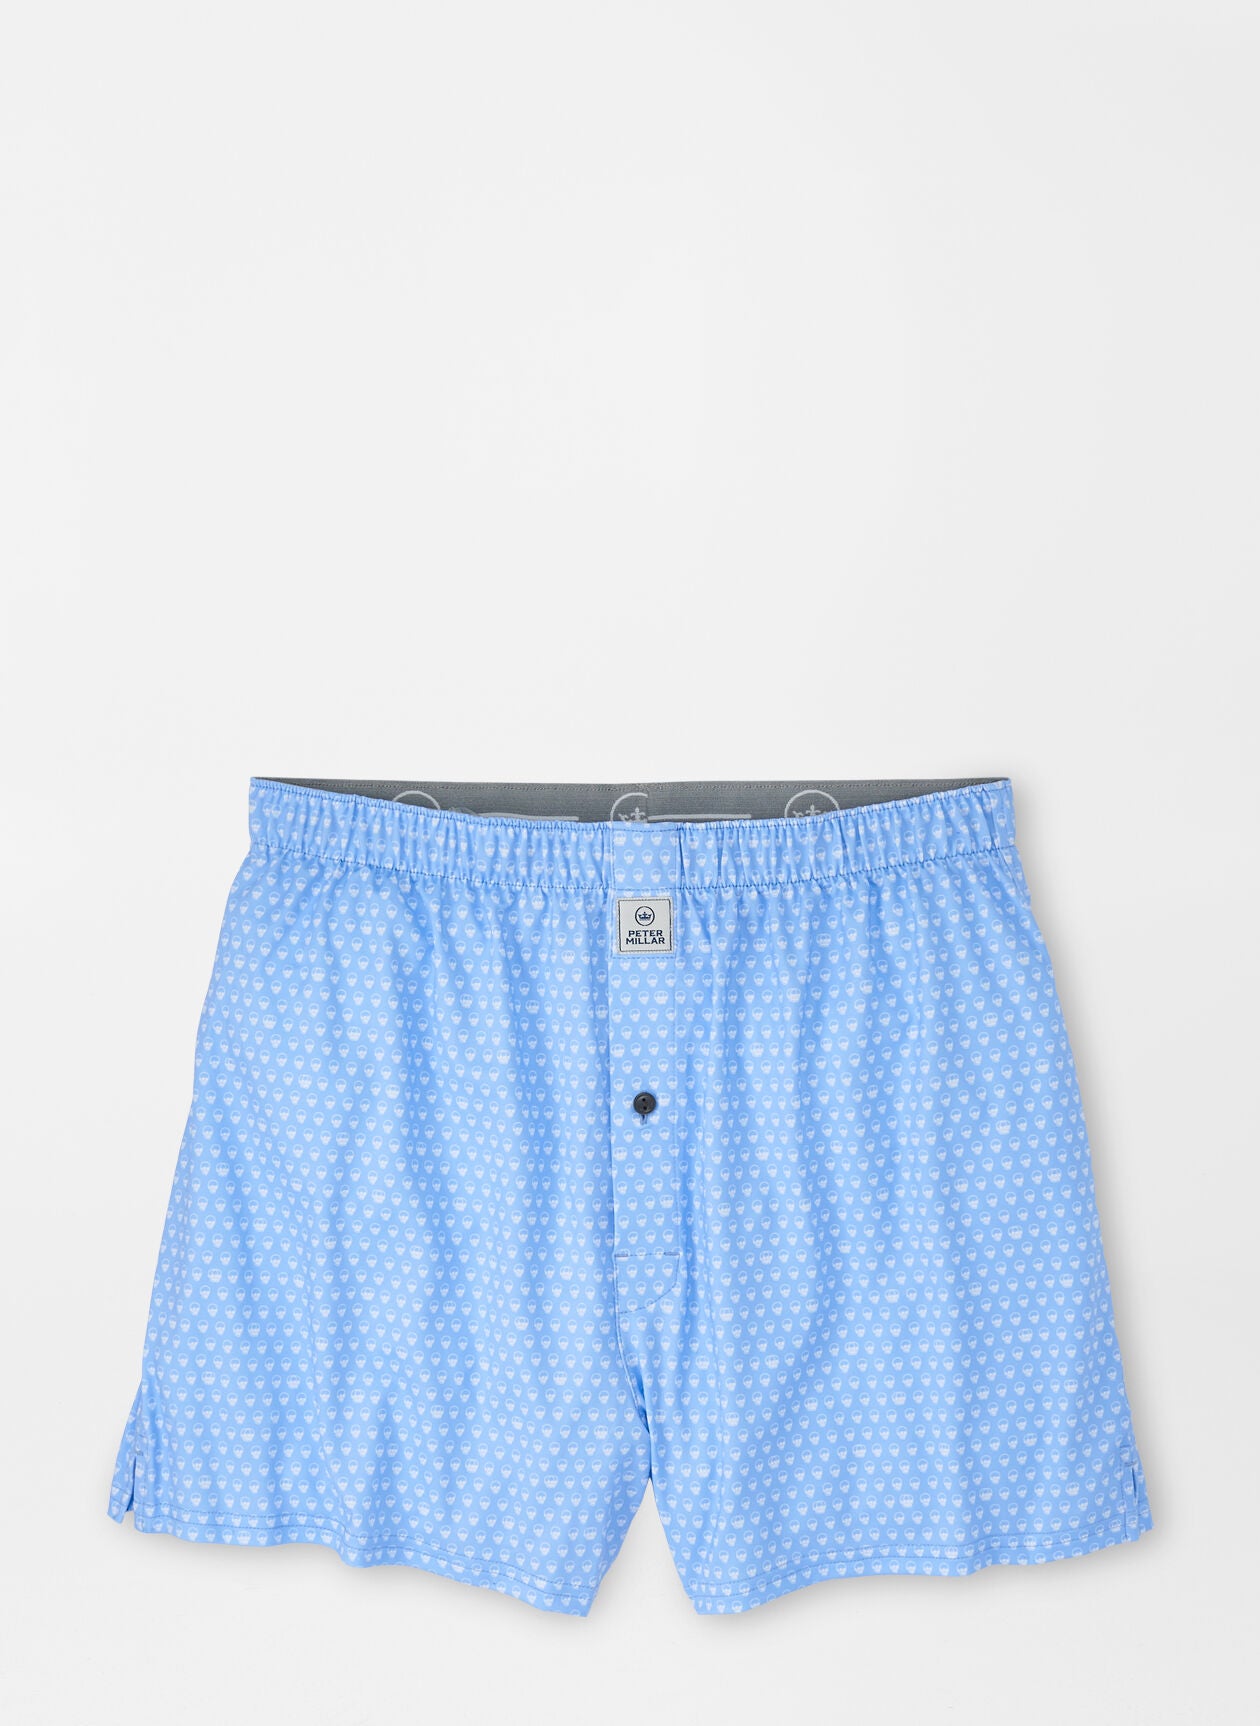 SEEING DOUBLE PERFORMANCE BOXER SHORT - COTTAGE BLUE